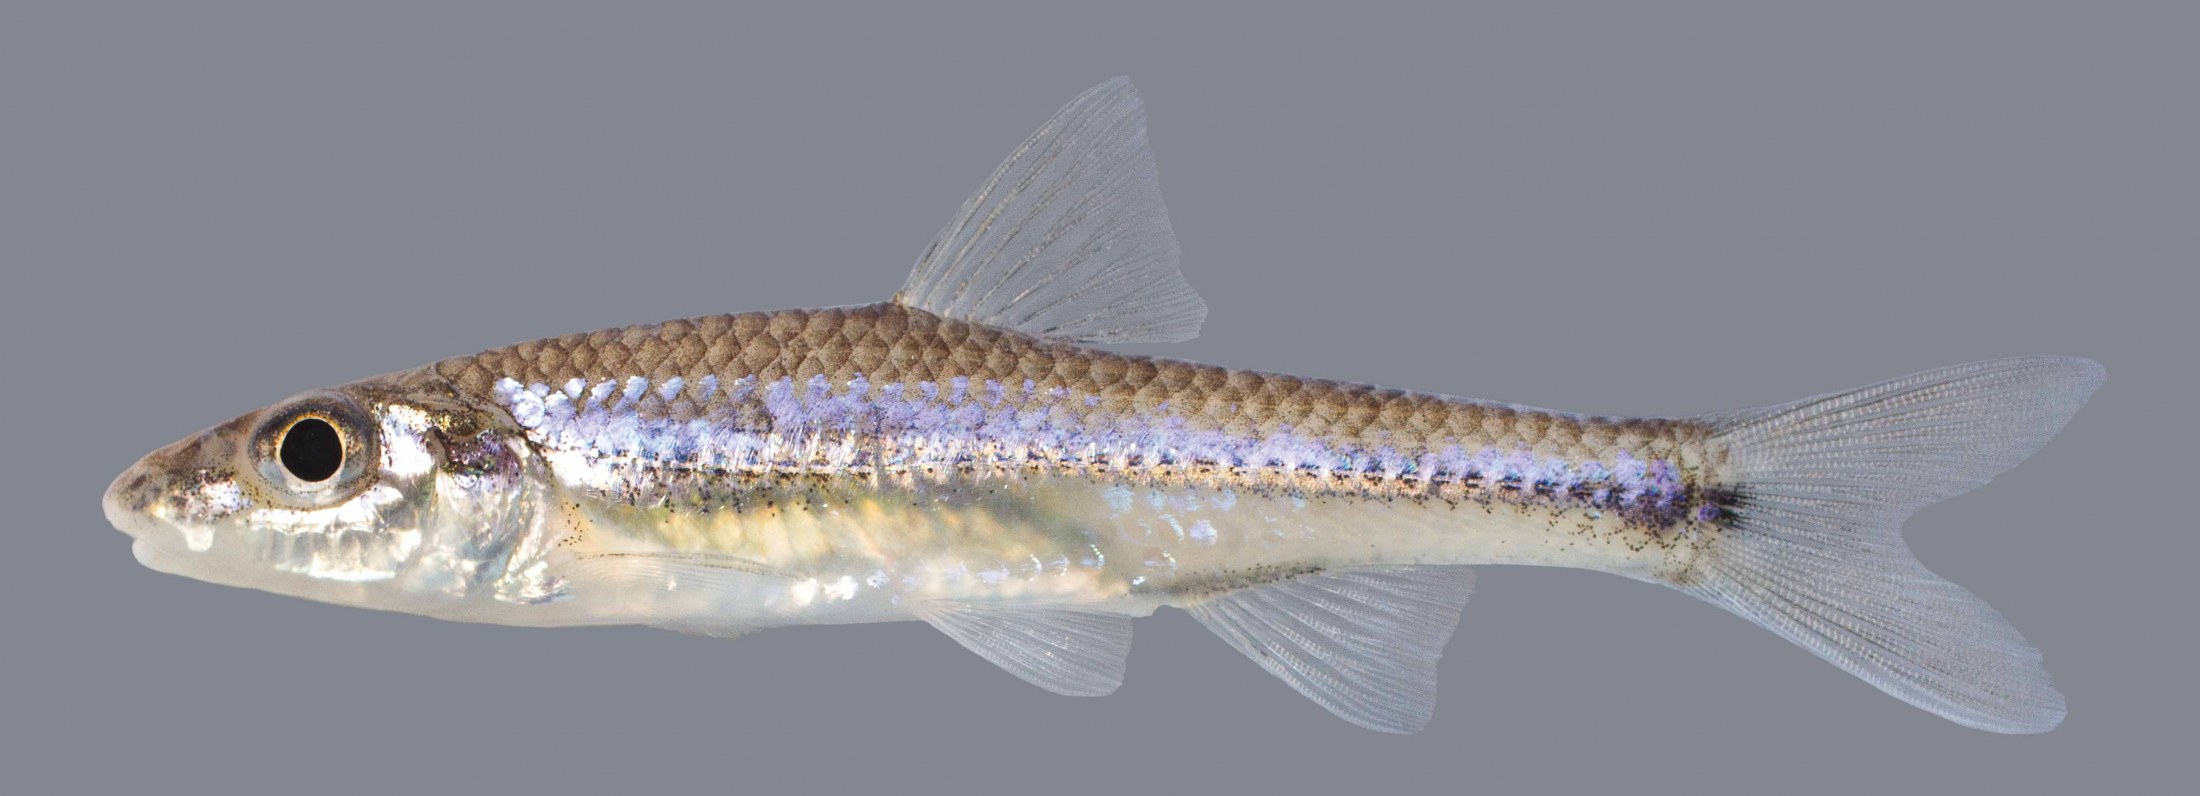 Longjaw Minnow Discover Fishes